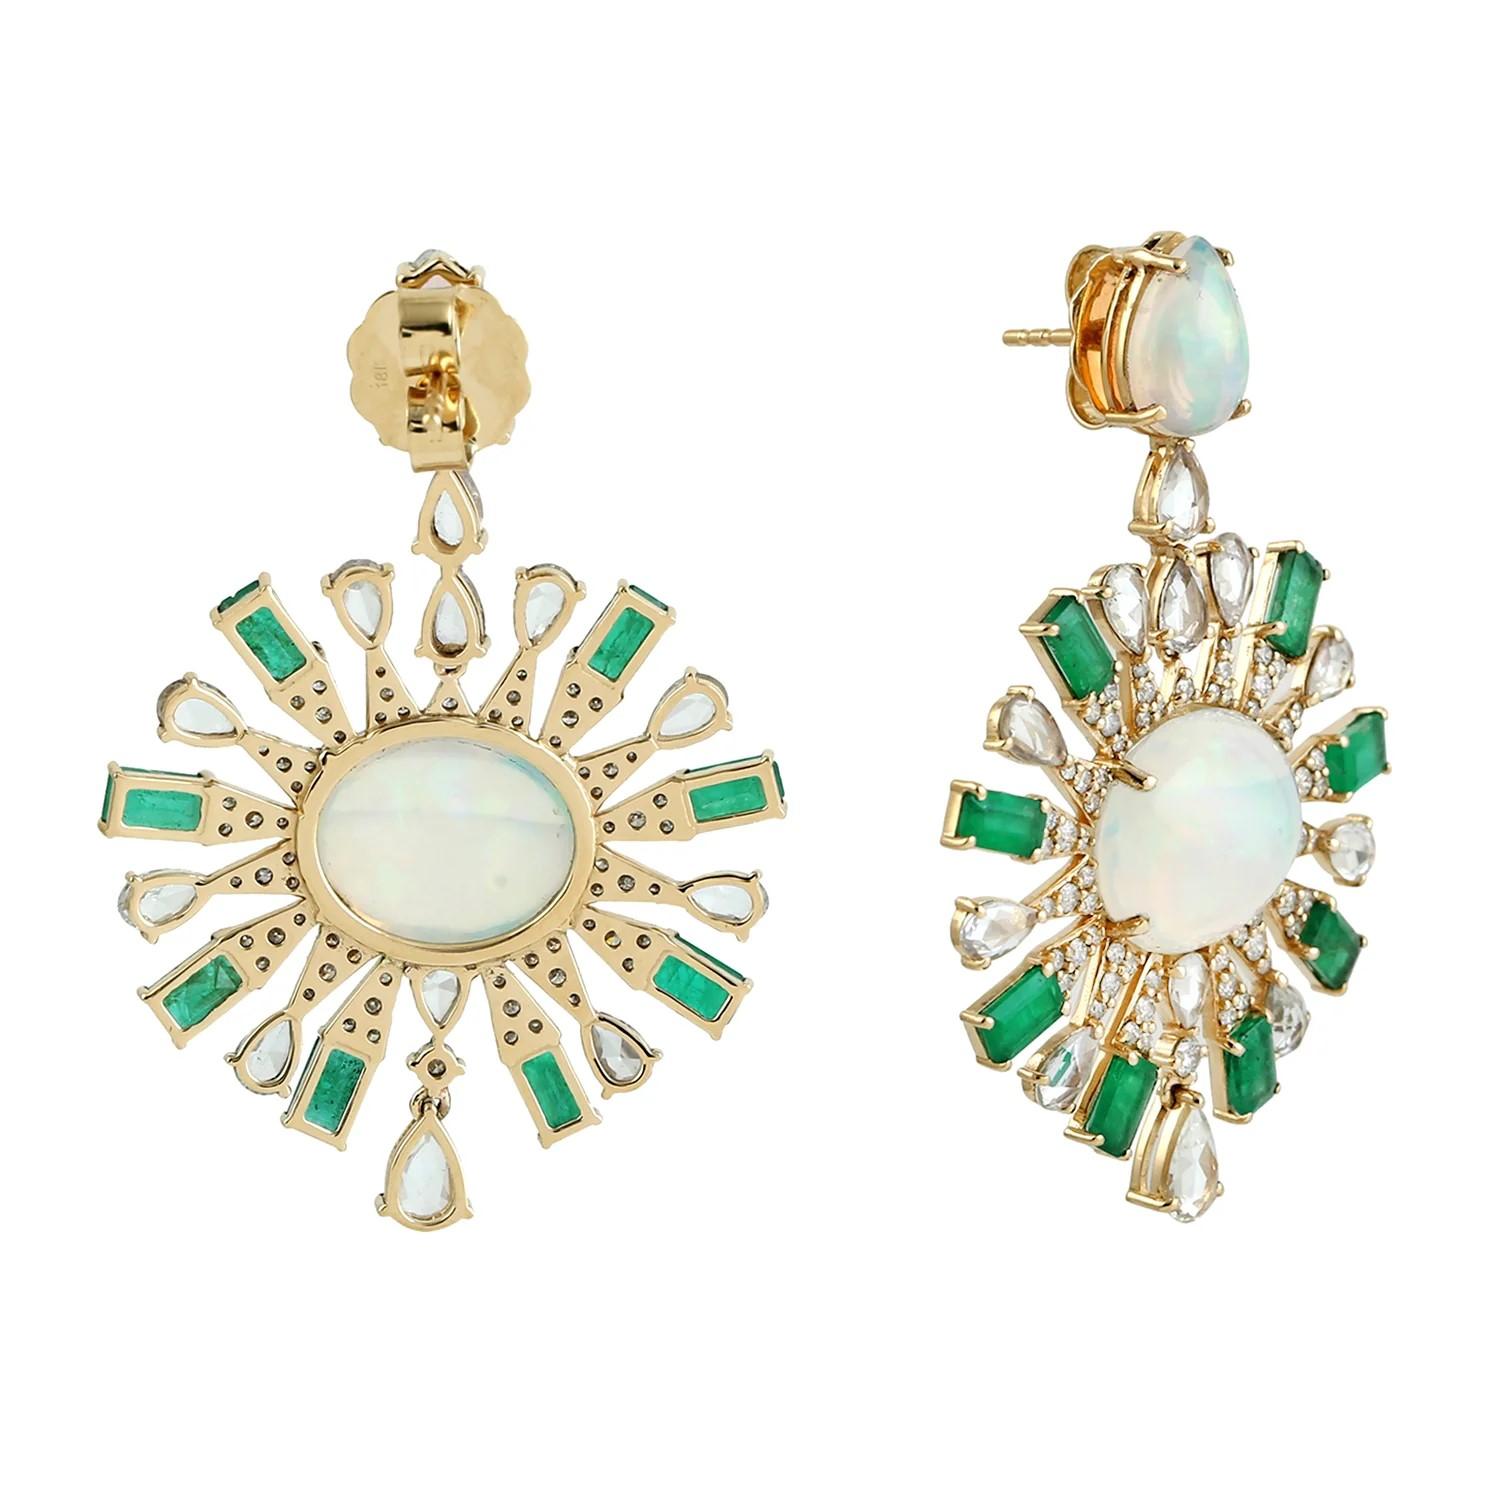 Handcrafted from 18-karat gold, these exquisite drop earrings are set with 11.61 carats Ethiopian Opal, 4.81 carats emerald and 1.17 carats of glimmering diamonds. 

FOLLOW  MEGHNA JEWELS storefront to view the latest collection & exclusive pieces. 